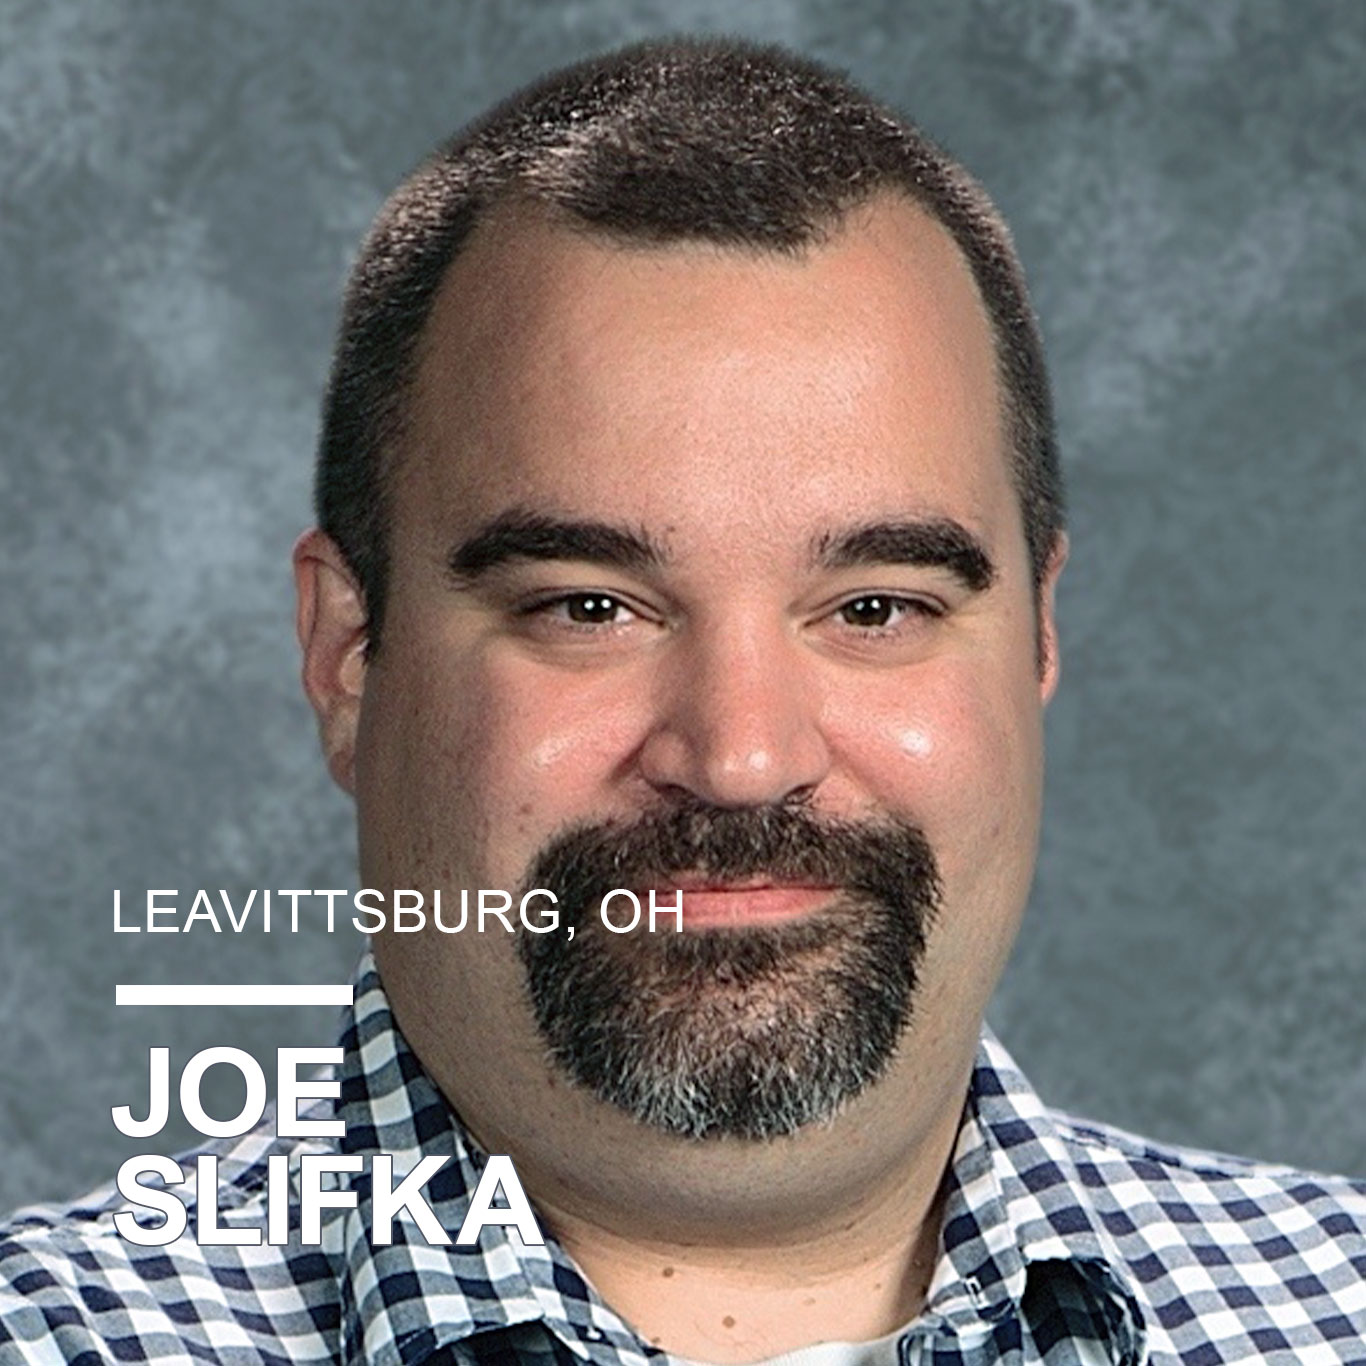 Joe Slifka ends every day excited for what the next day brings. The technology teacher for LaBrae Local School District in Leavittsburg, OH, Joe is passionate about integrating robotics in his daily lessons and helping students become creators through technology. He created an after-school robotics club, was honored as a 2011 Siemens STEM Institute Fellow, and was a state-level finalist for the Presidential Award for Excellence in Math and Science Teaching. Joe is in his 16th year of teaching and loves the freedom he experiences teaching everything from robotics to 3-D printing.